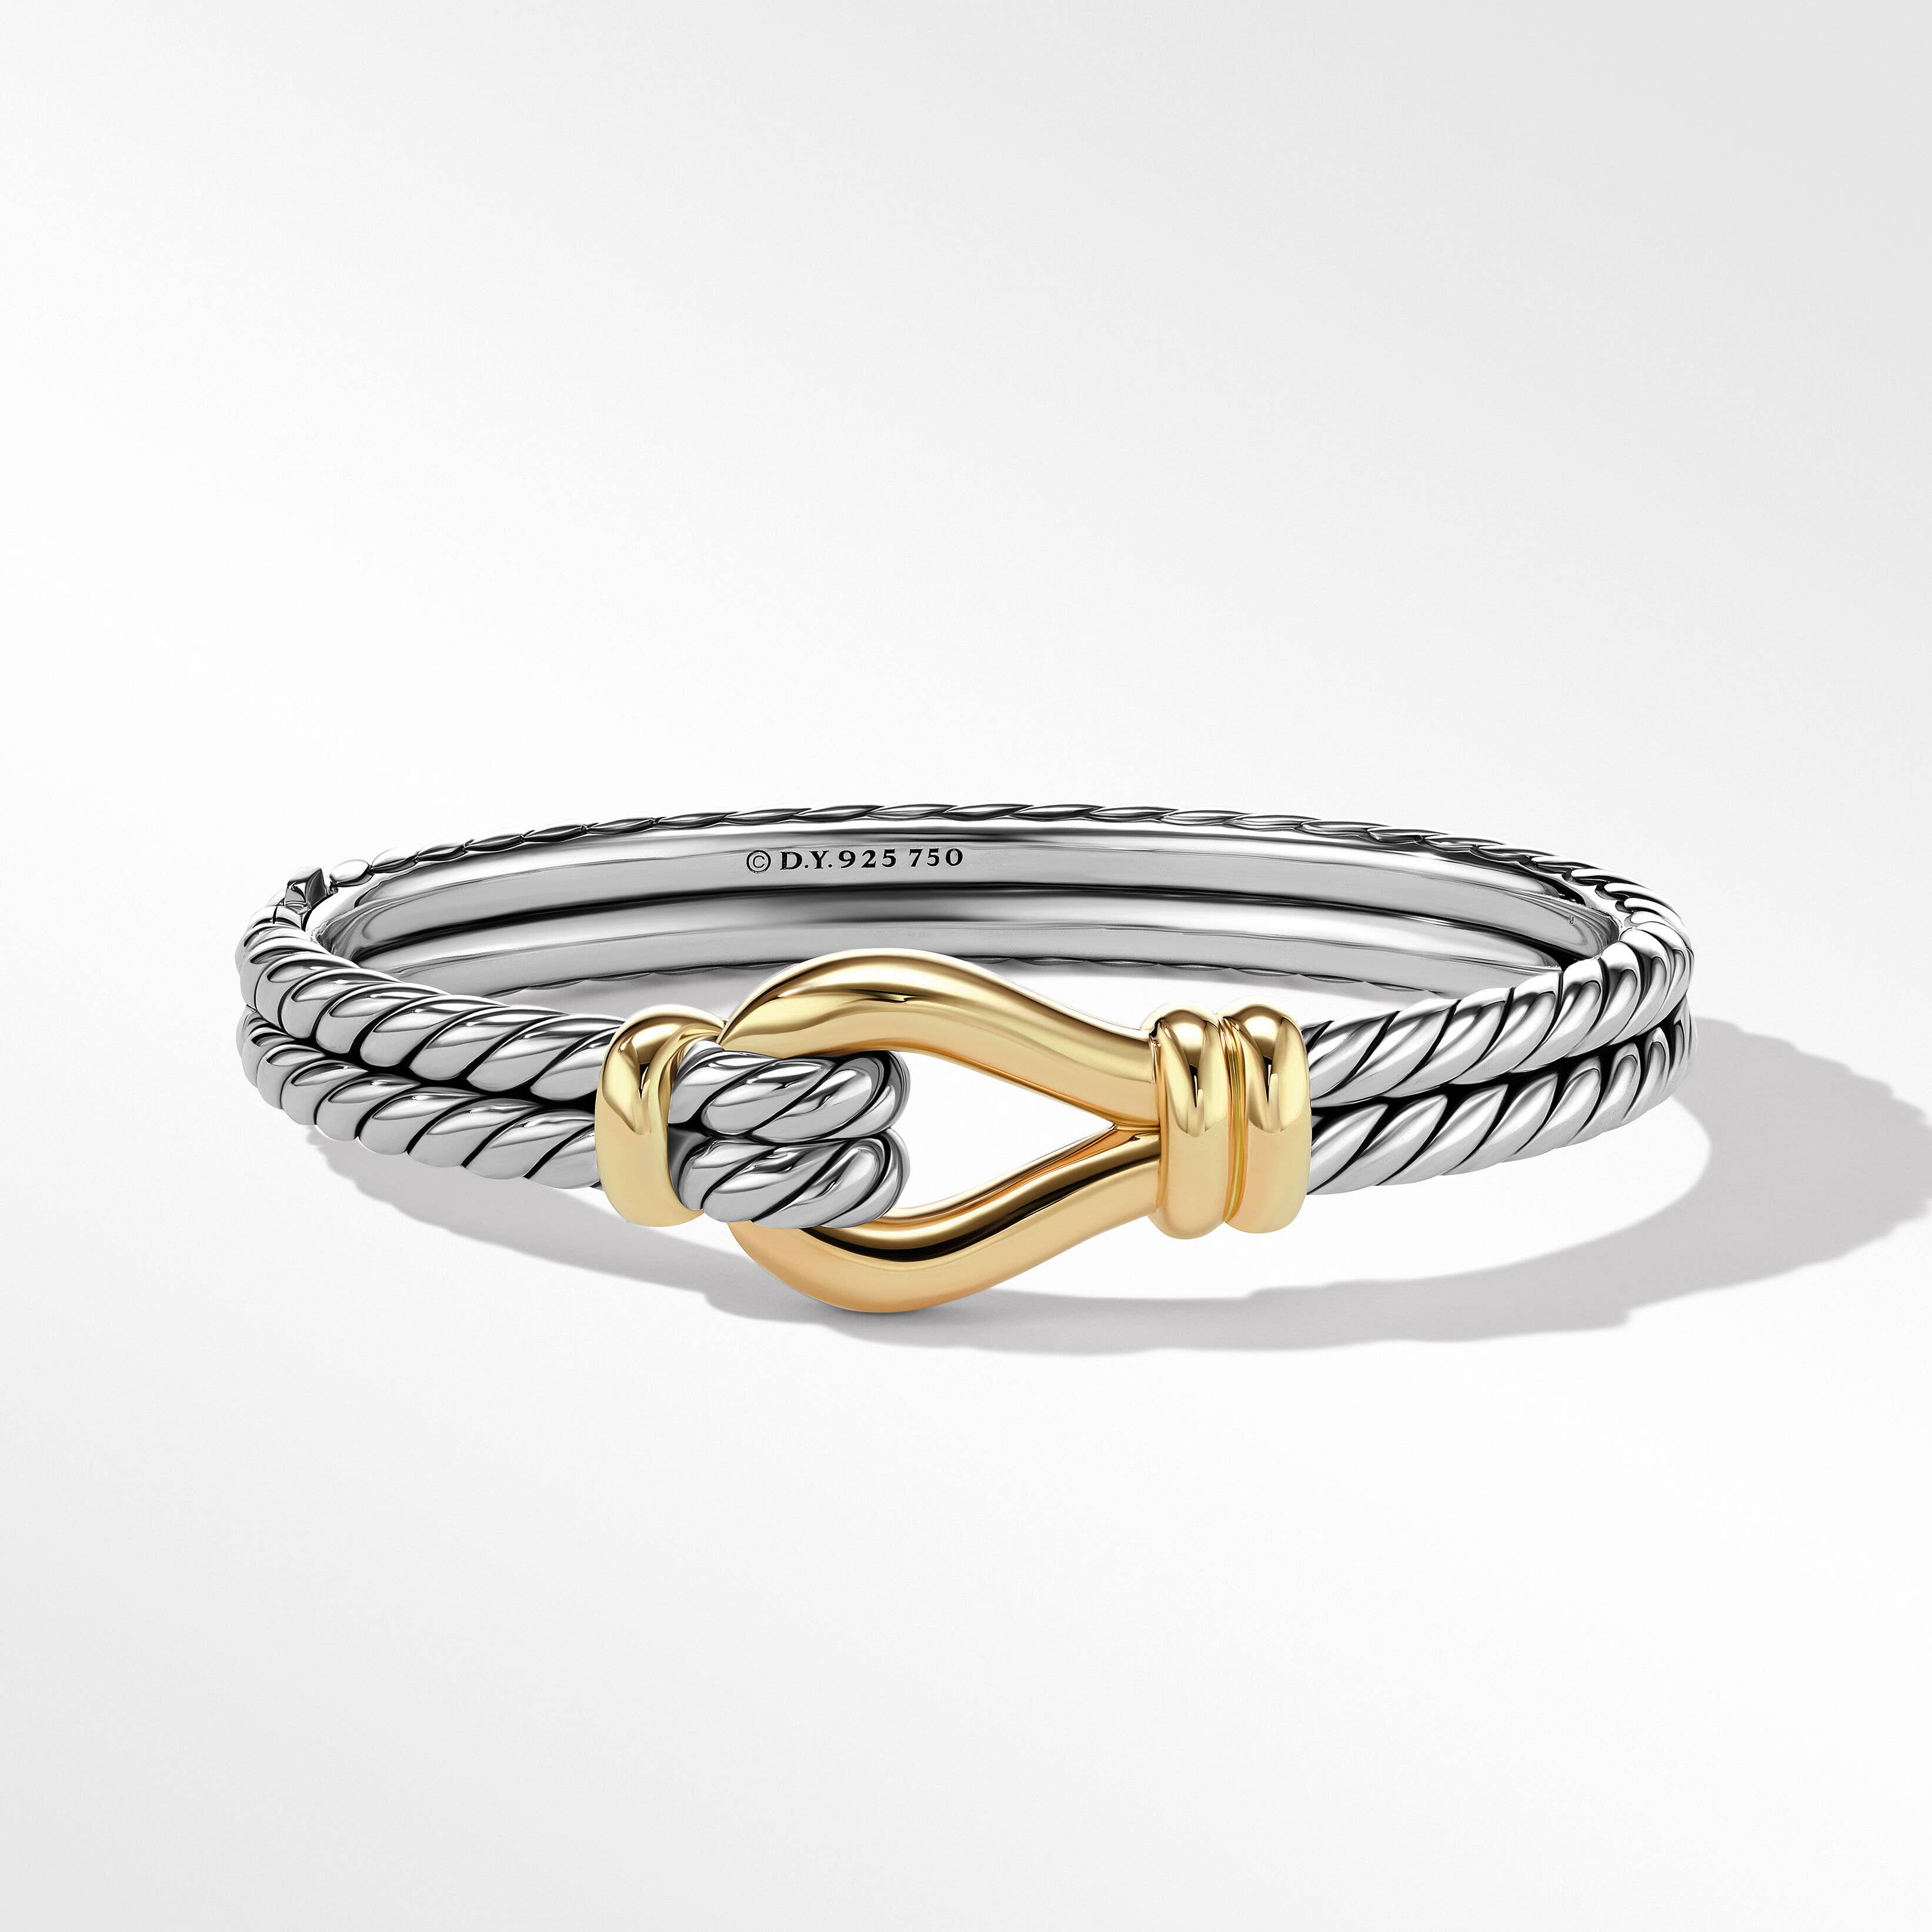 Thoroughbred Loop Bracelet in Sterling Silver with 18K Yellow Gold